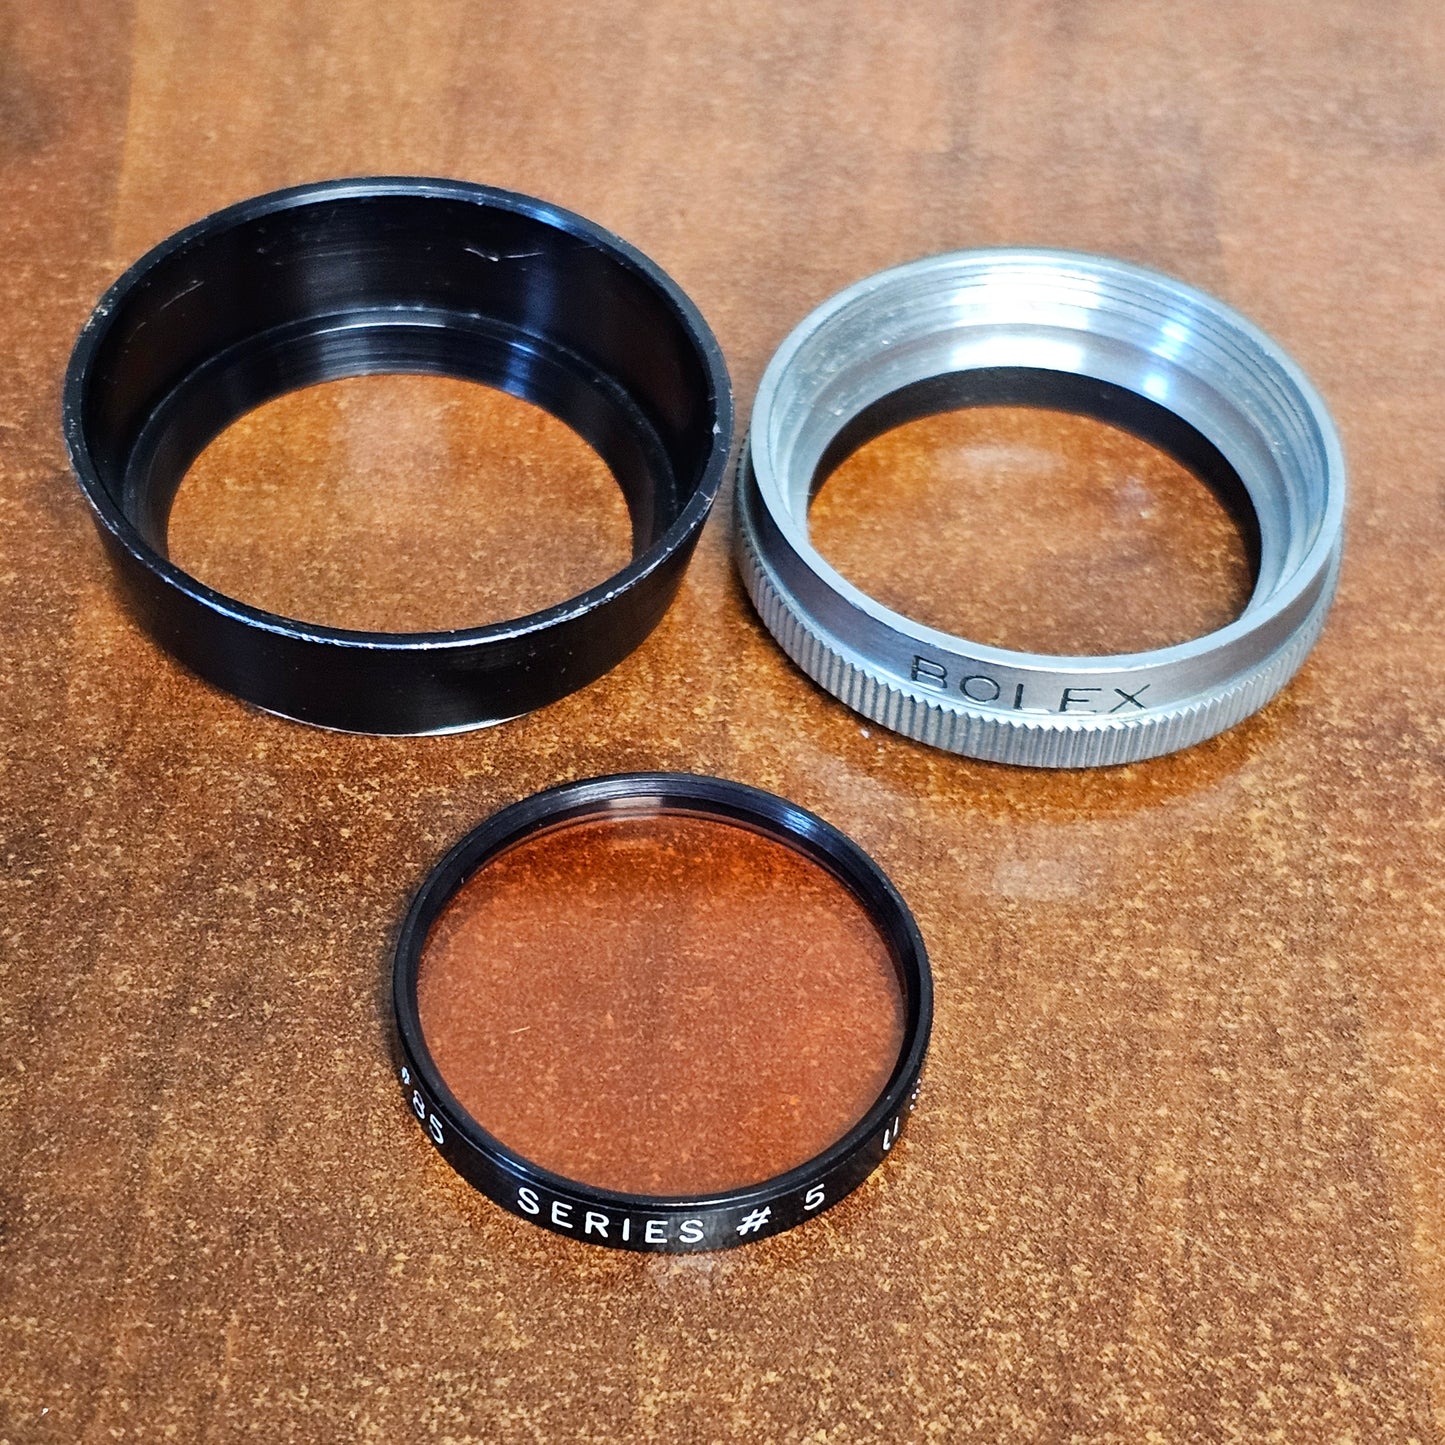 Bolex 32F5 Adapter Ring And Lens Shade Retainer for Series 5 Drop in Filters